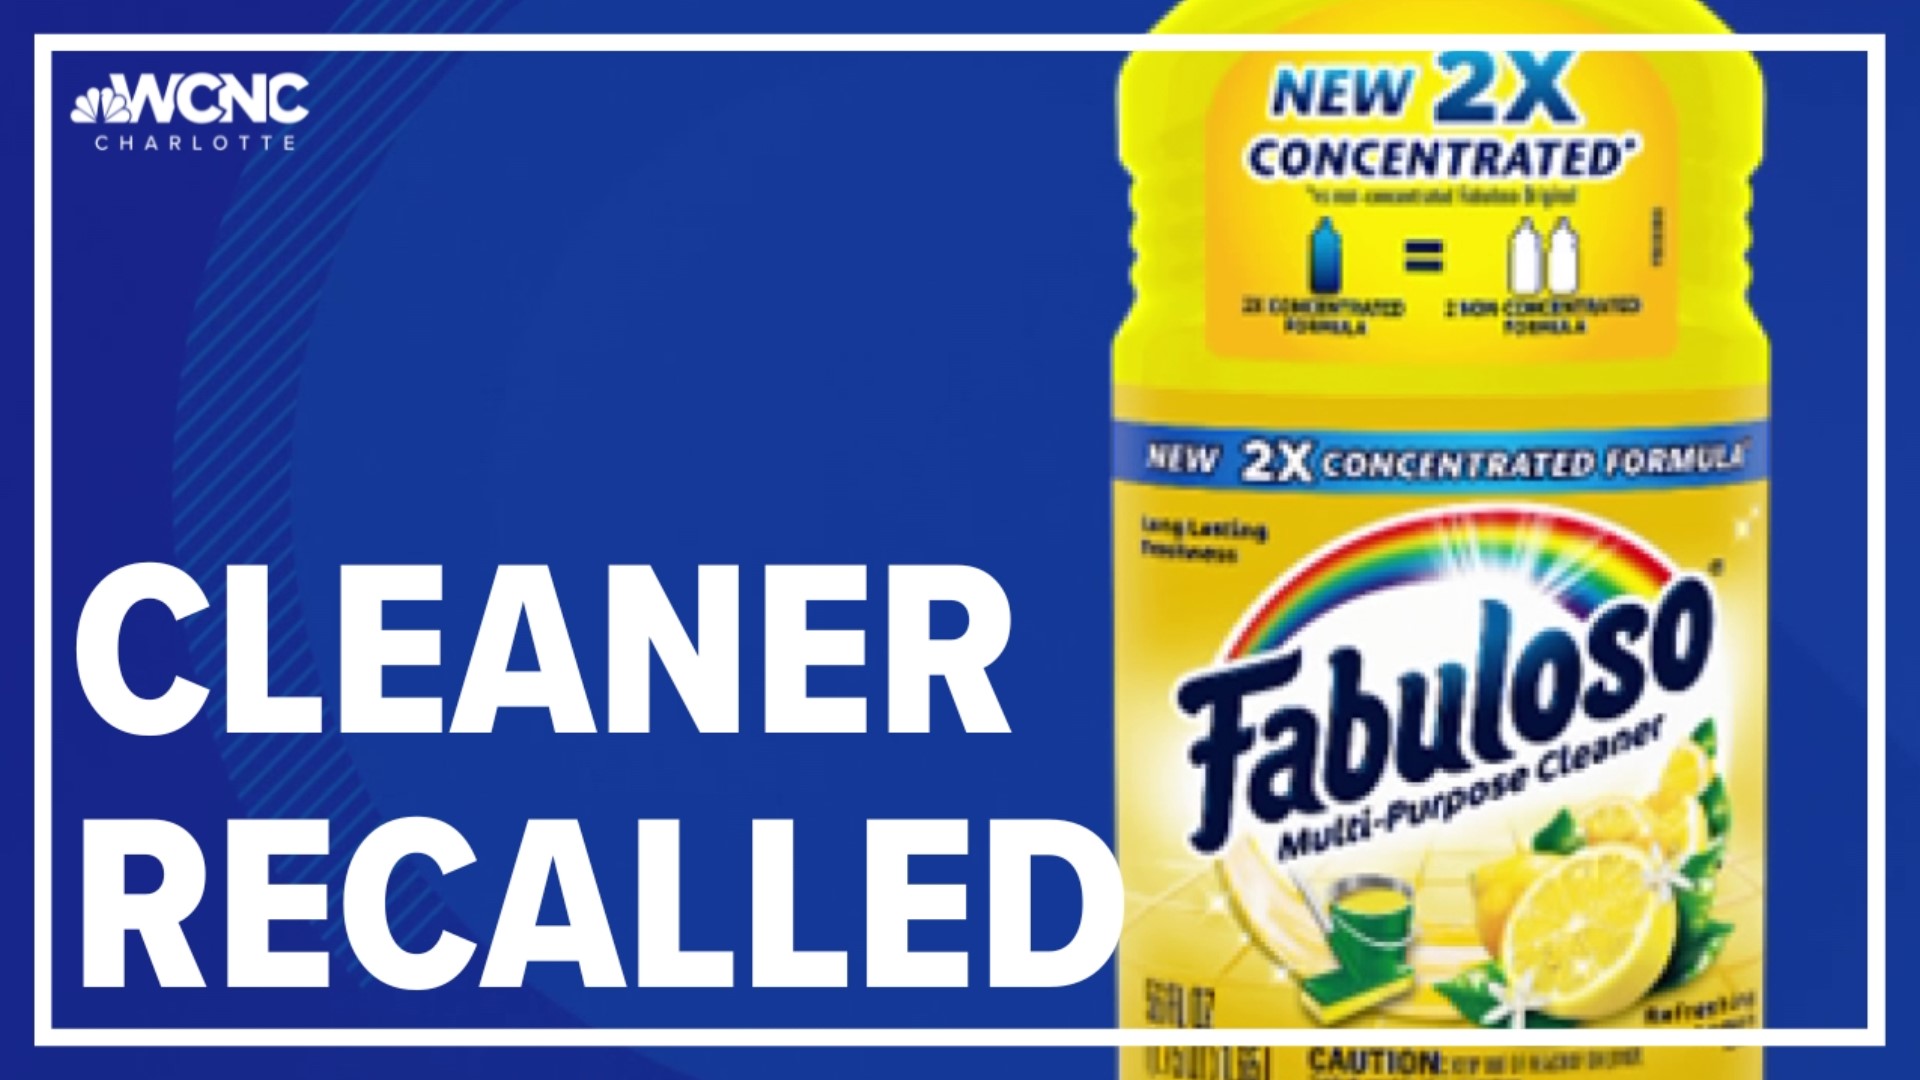 Colgate-Palmolive is recalling 4.9 million bottles of its Fabuloso multi-purpose cleaning liquid because the products might be contaminated with bacteria.